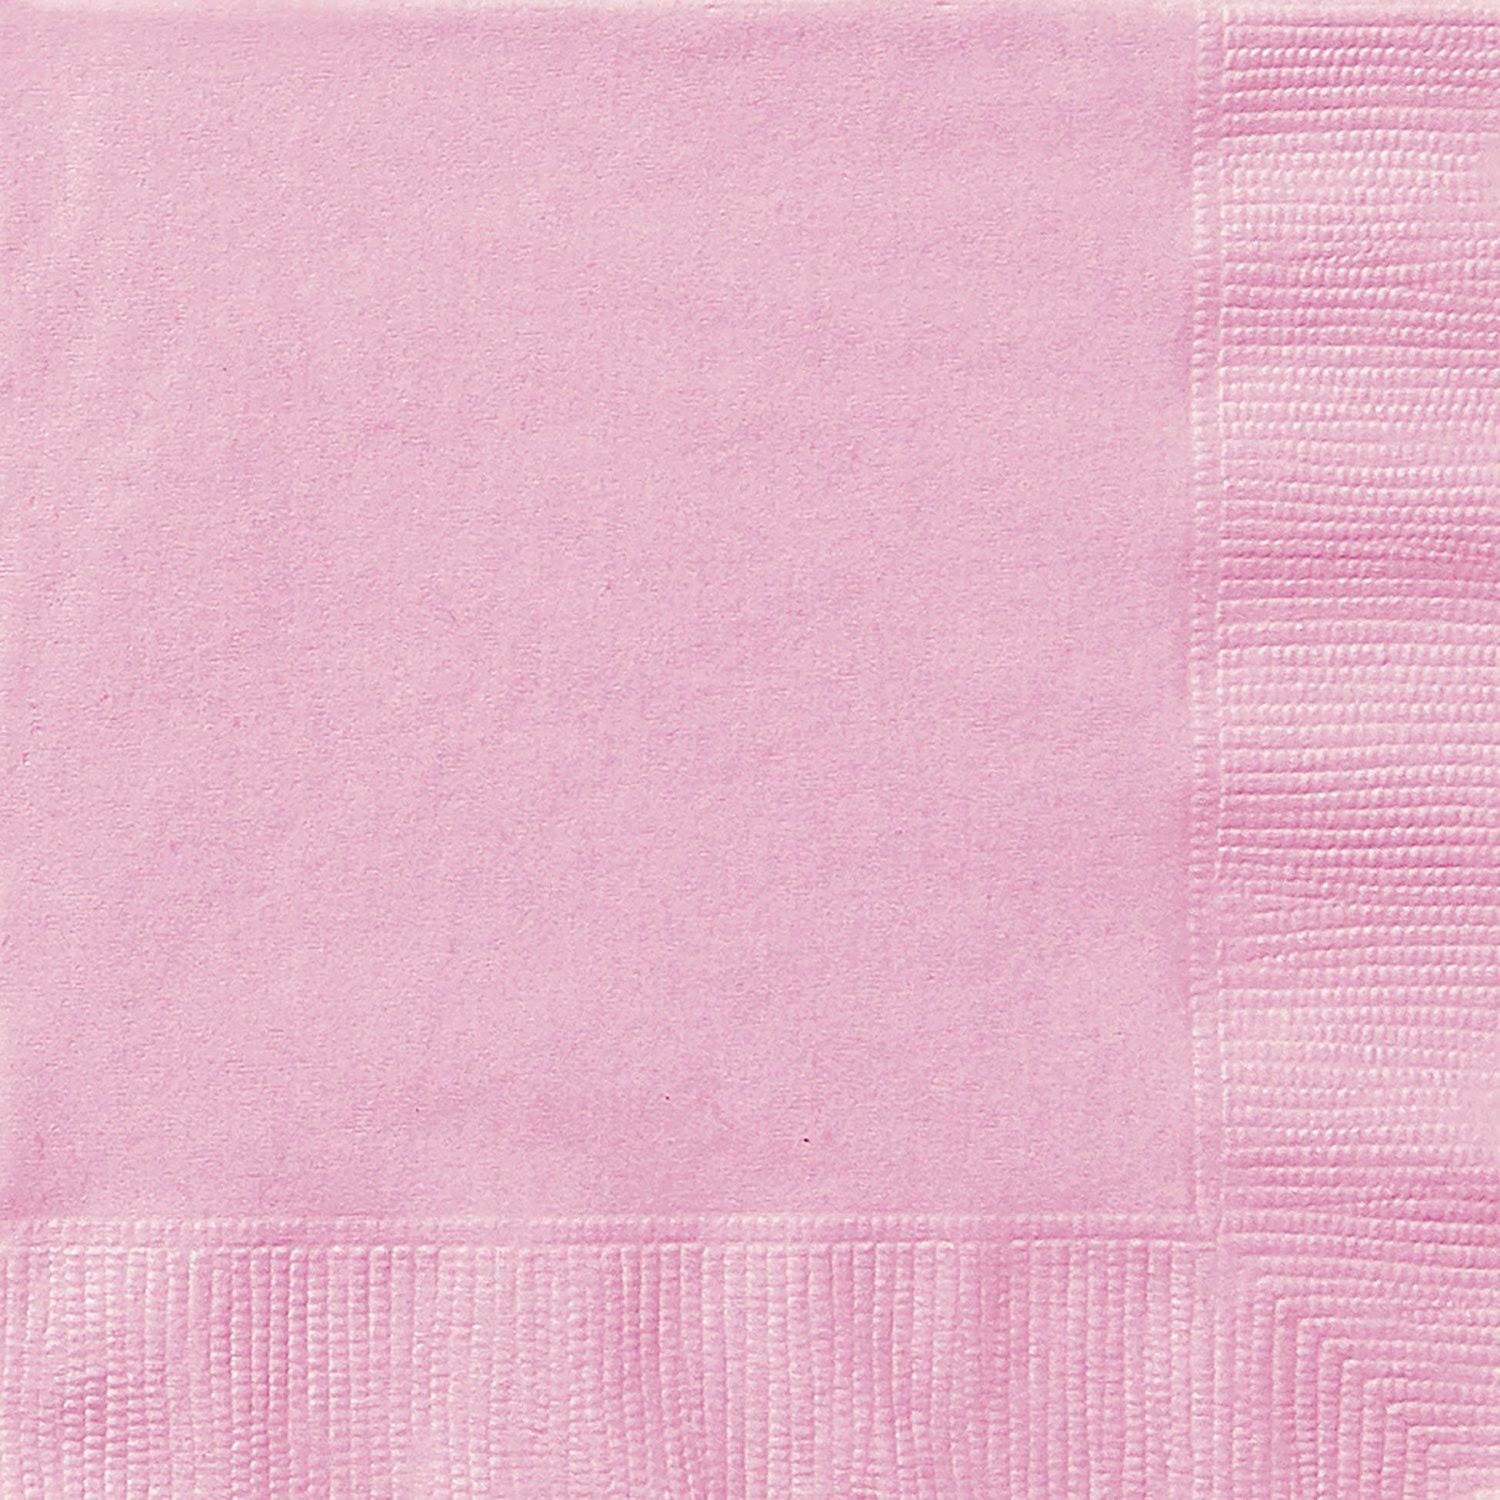 Lovely Pink Luncheon Napkins 2Ply 20 Pack